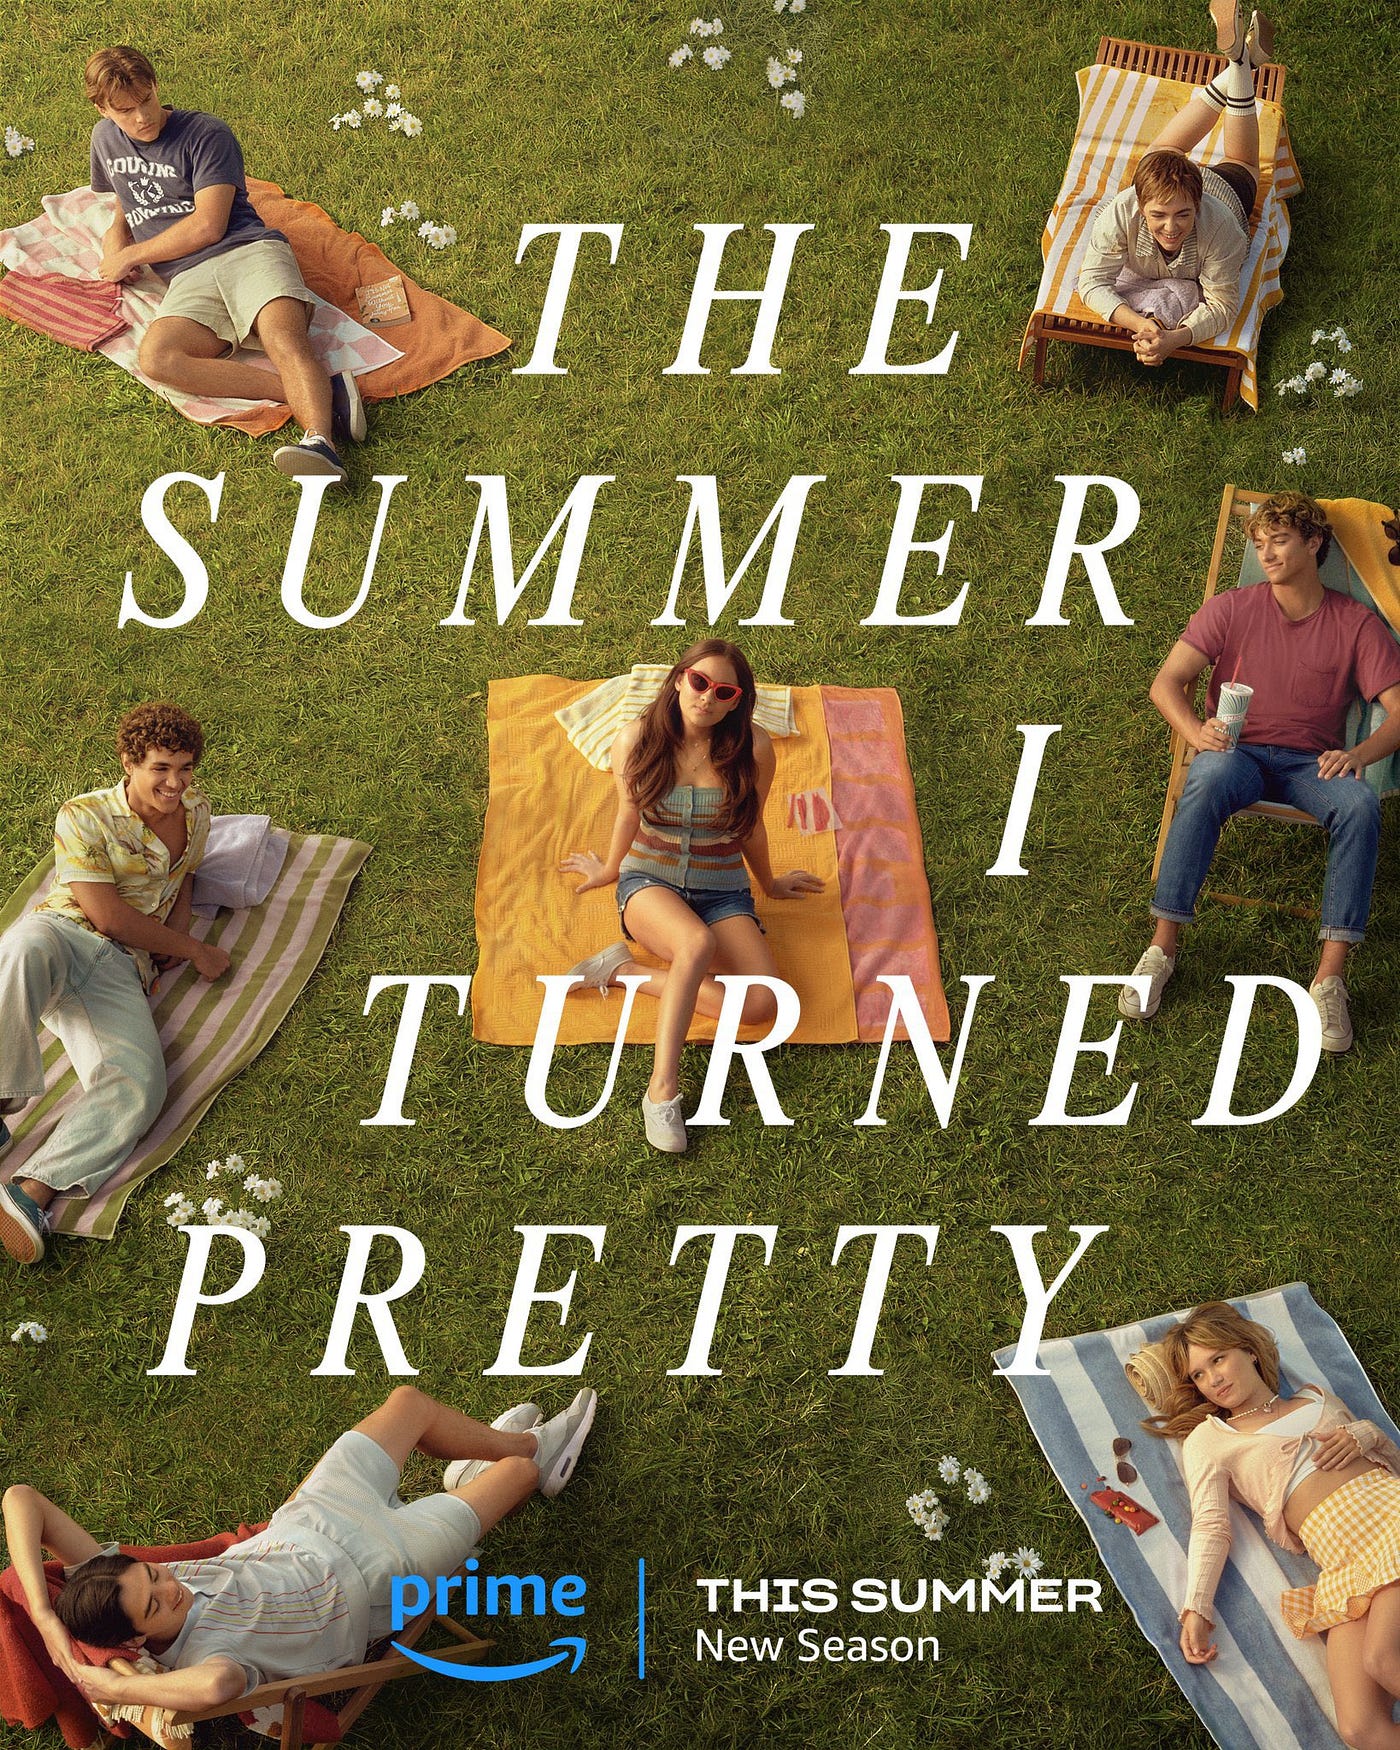 Does The Summer I Turned Pretty's Belly choose Jeremiah or Conrad in the  books?